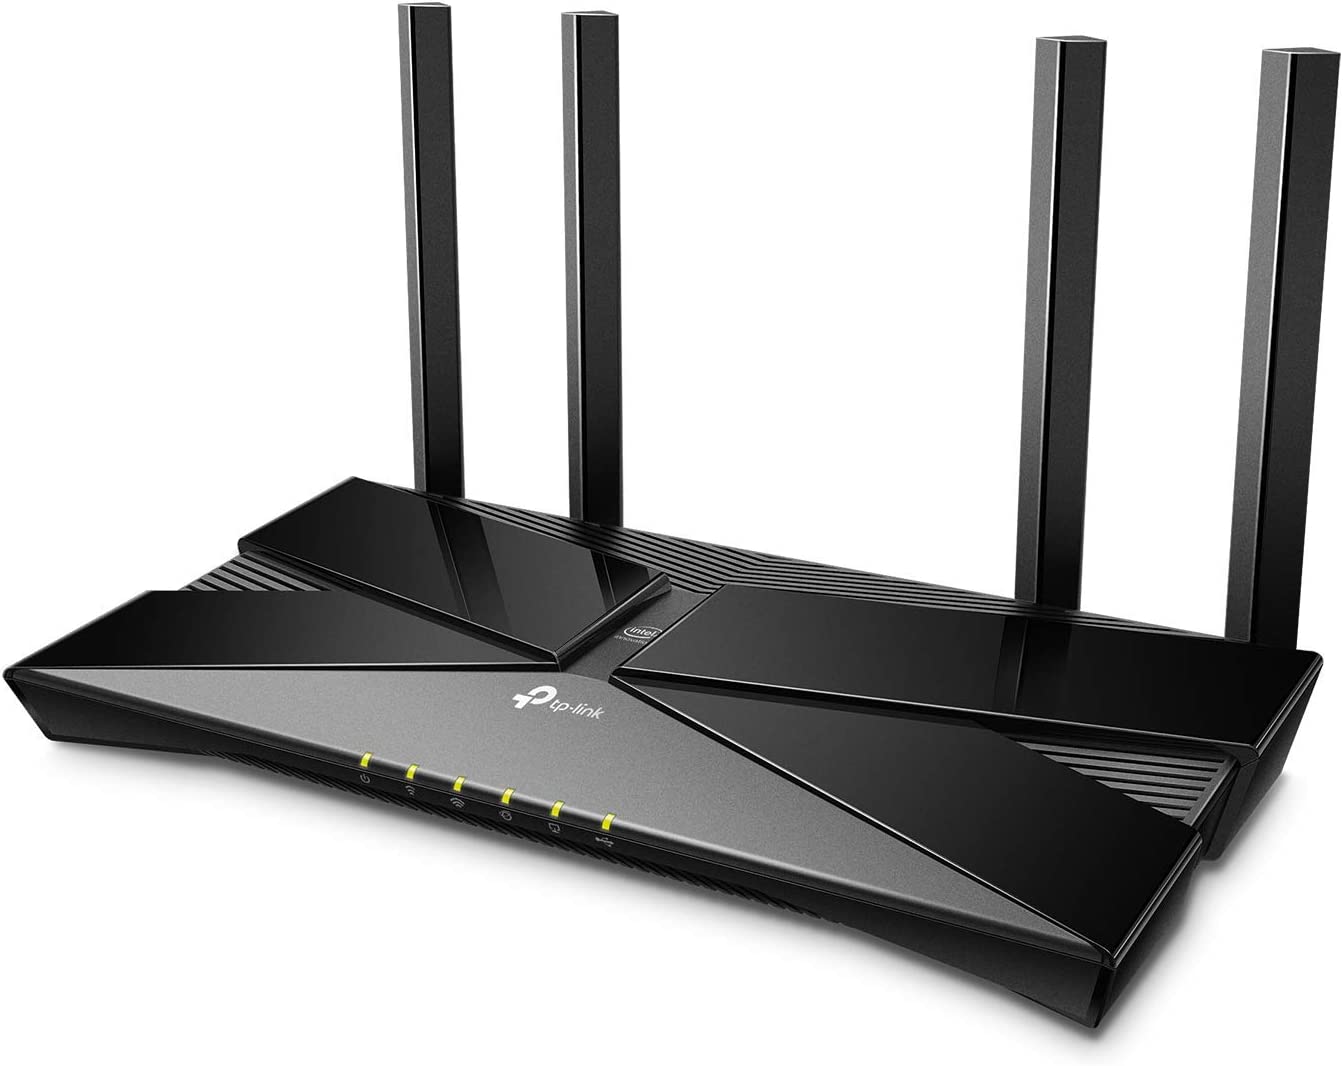 TP-Link - WiFi 6 AX3000 Archer AX50 Smart WiFi Router,  802.11ax Router, Gigabit Router, Dual Band, Parental Controls, MU-MIMO